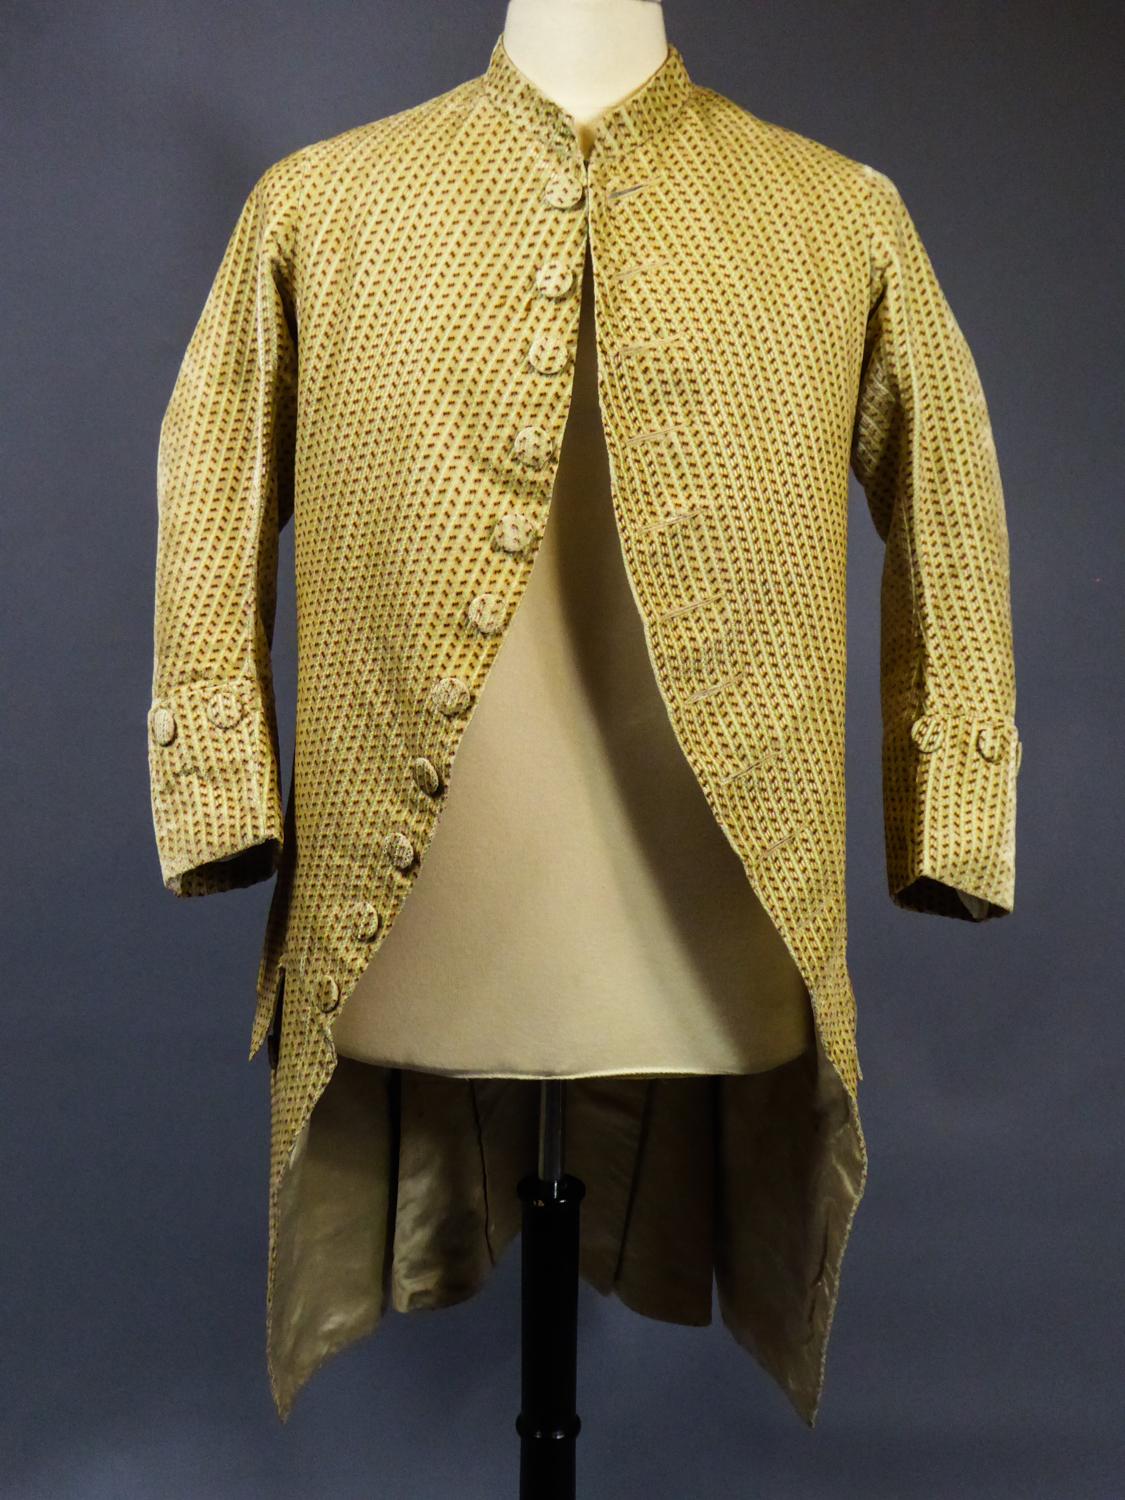 Circa 1775
France

French gentleman's frock coat in miniature velvet from the Louis XV / Louis XVI transition period around 1775. Clever velvet as Miniature in cut silk velvet brocade. Stripes with herringbone effect of red green and cream color.